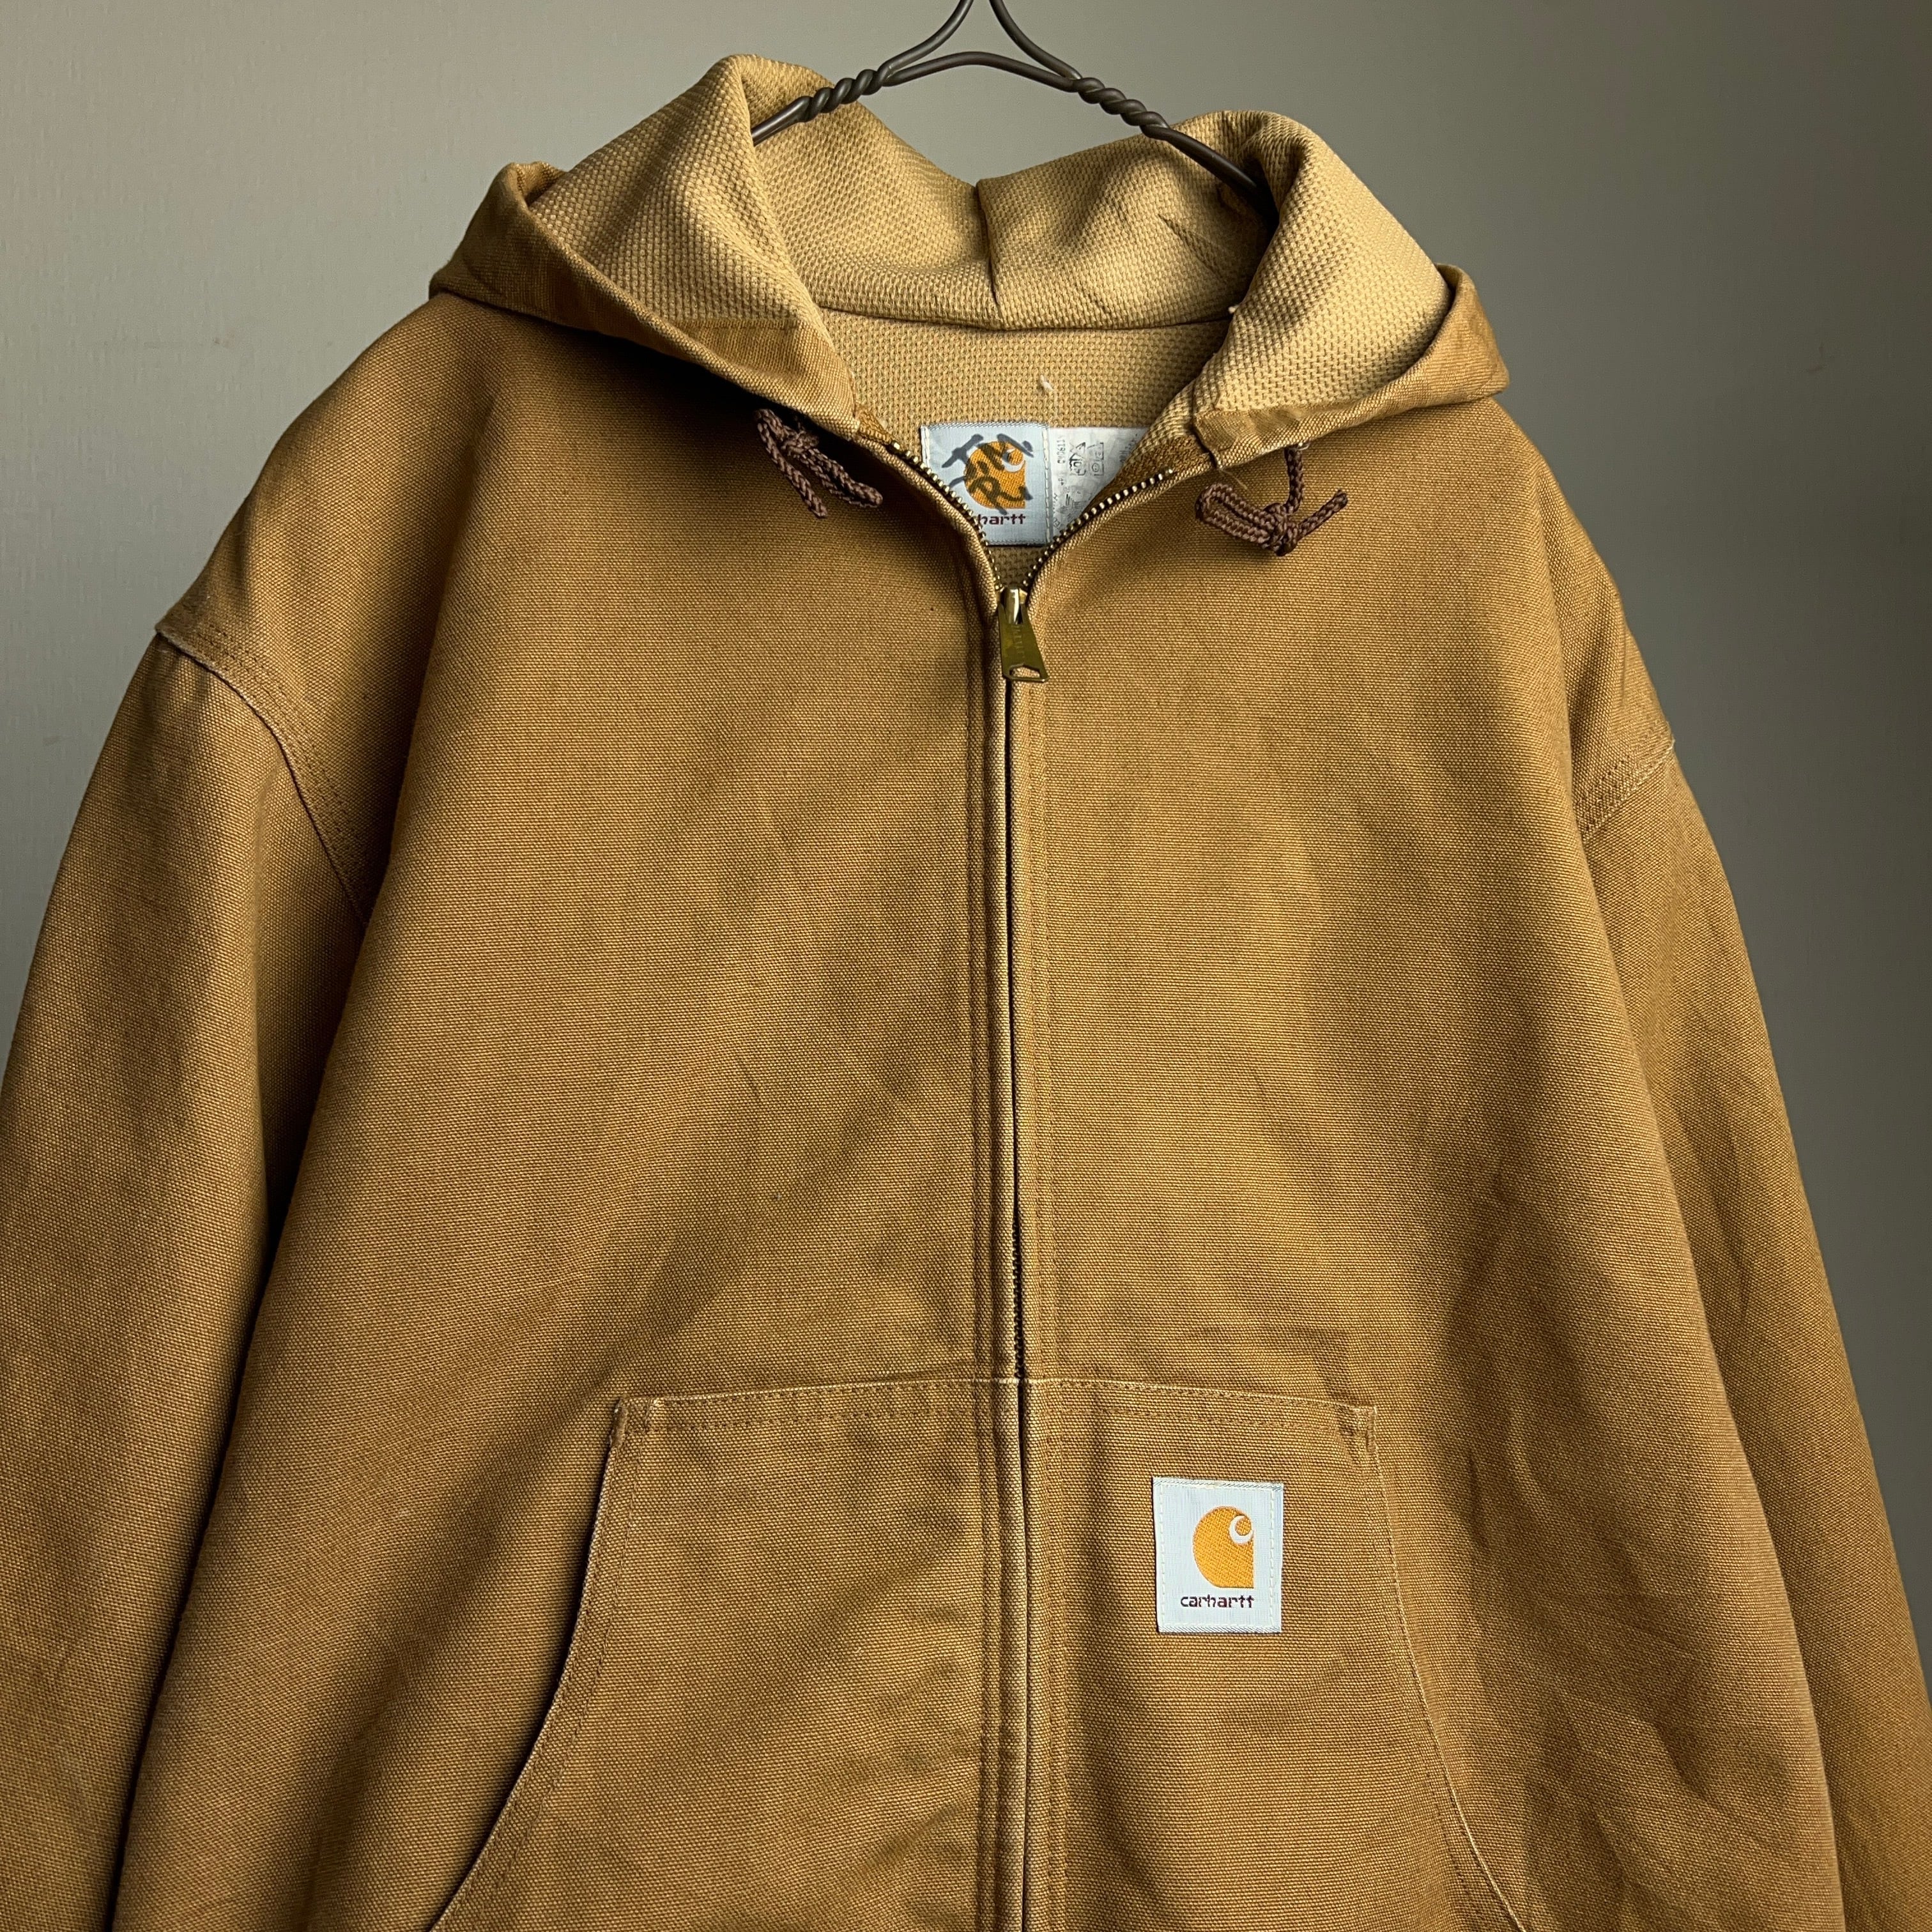 80's~90's Carhartt Active Jacket USA製 SIZE L 90年代 カーハート ...